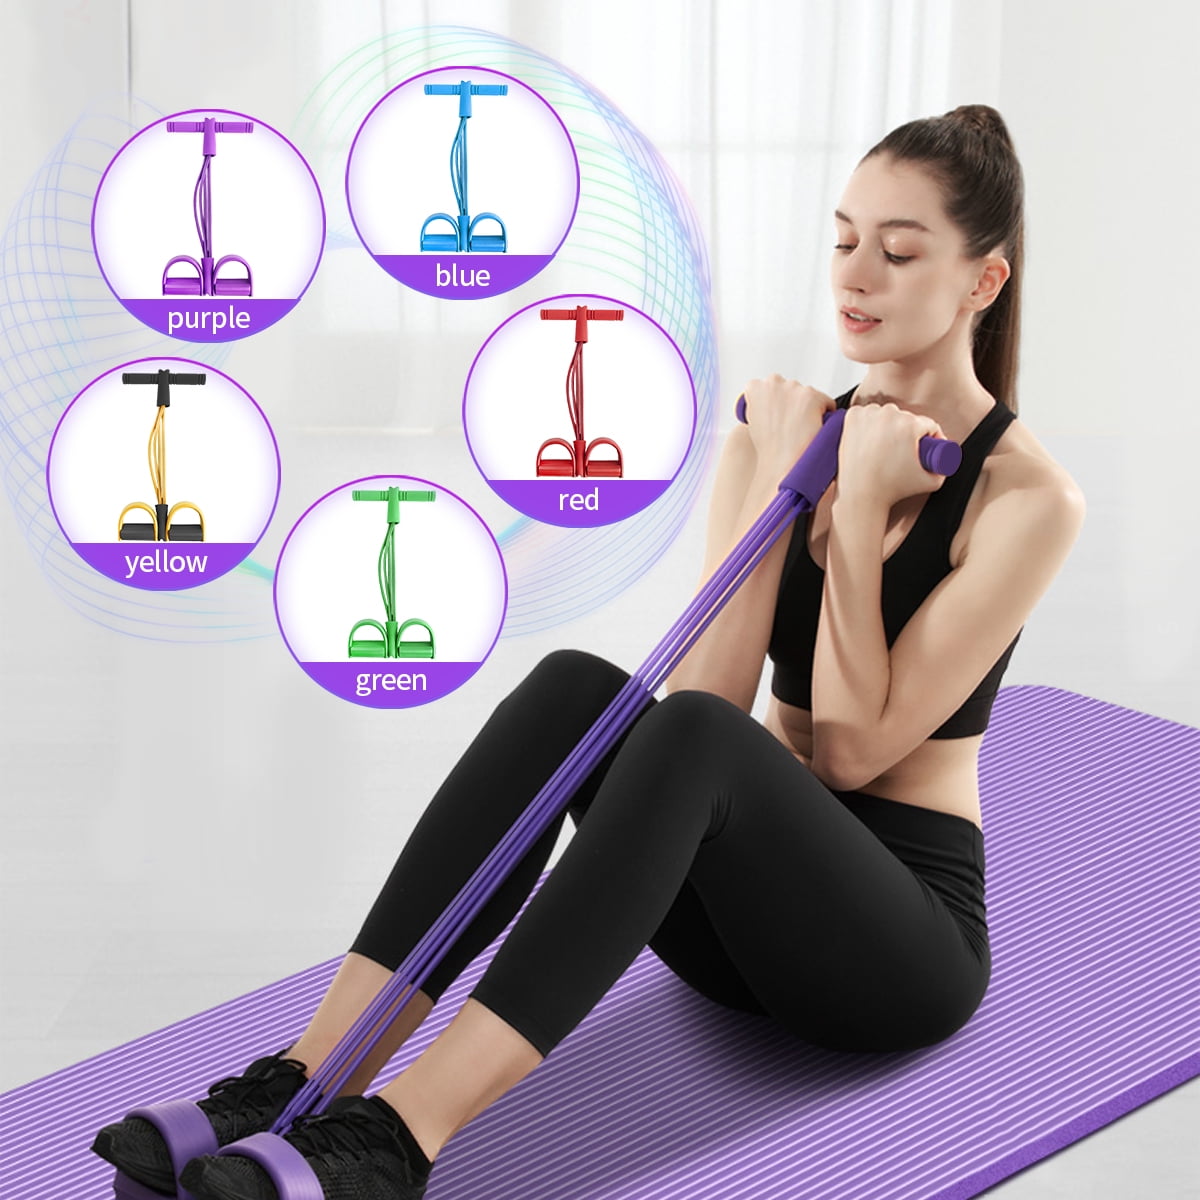 Details about   Set Of 5 Resistance Bands Loop Exercise Workout CrossFit Fitness Stretching Yoga 